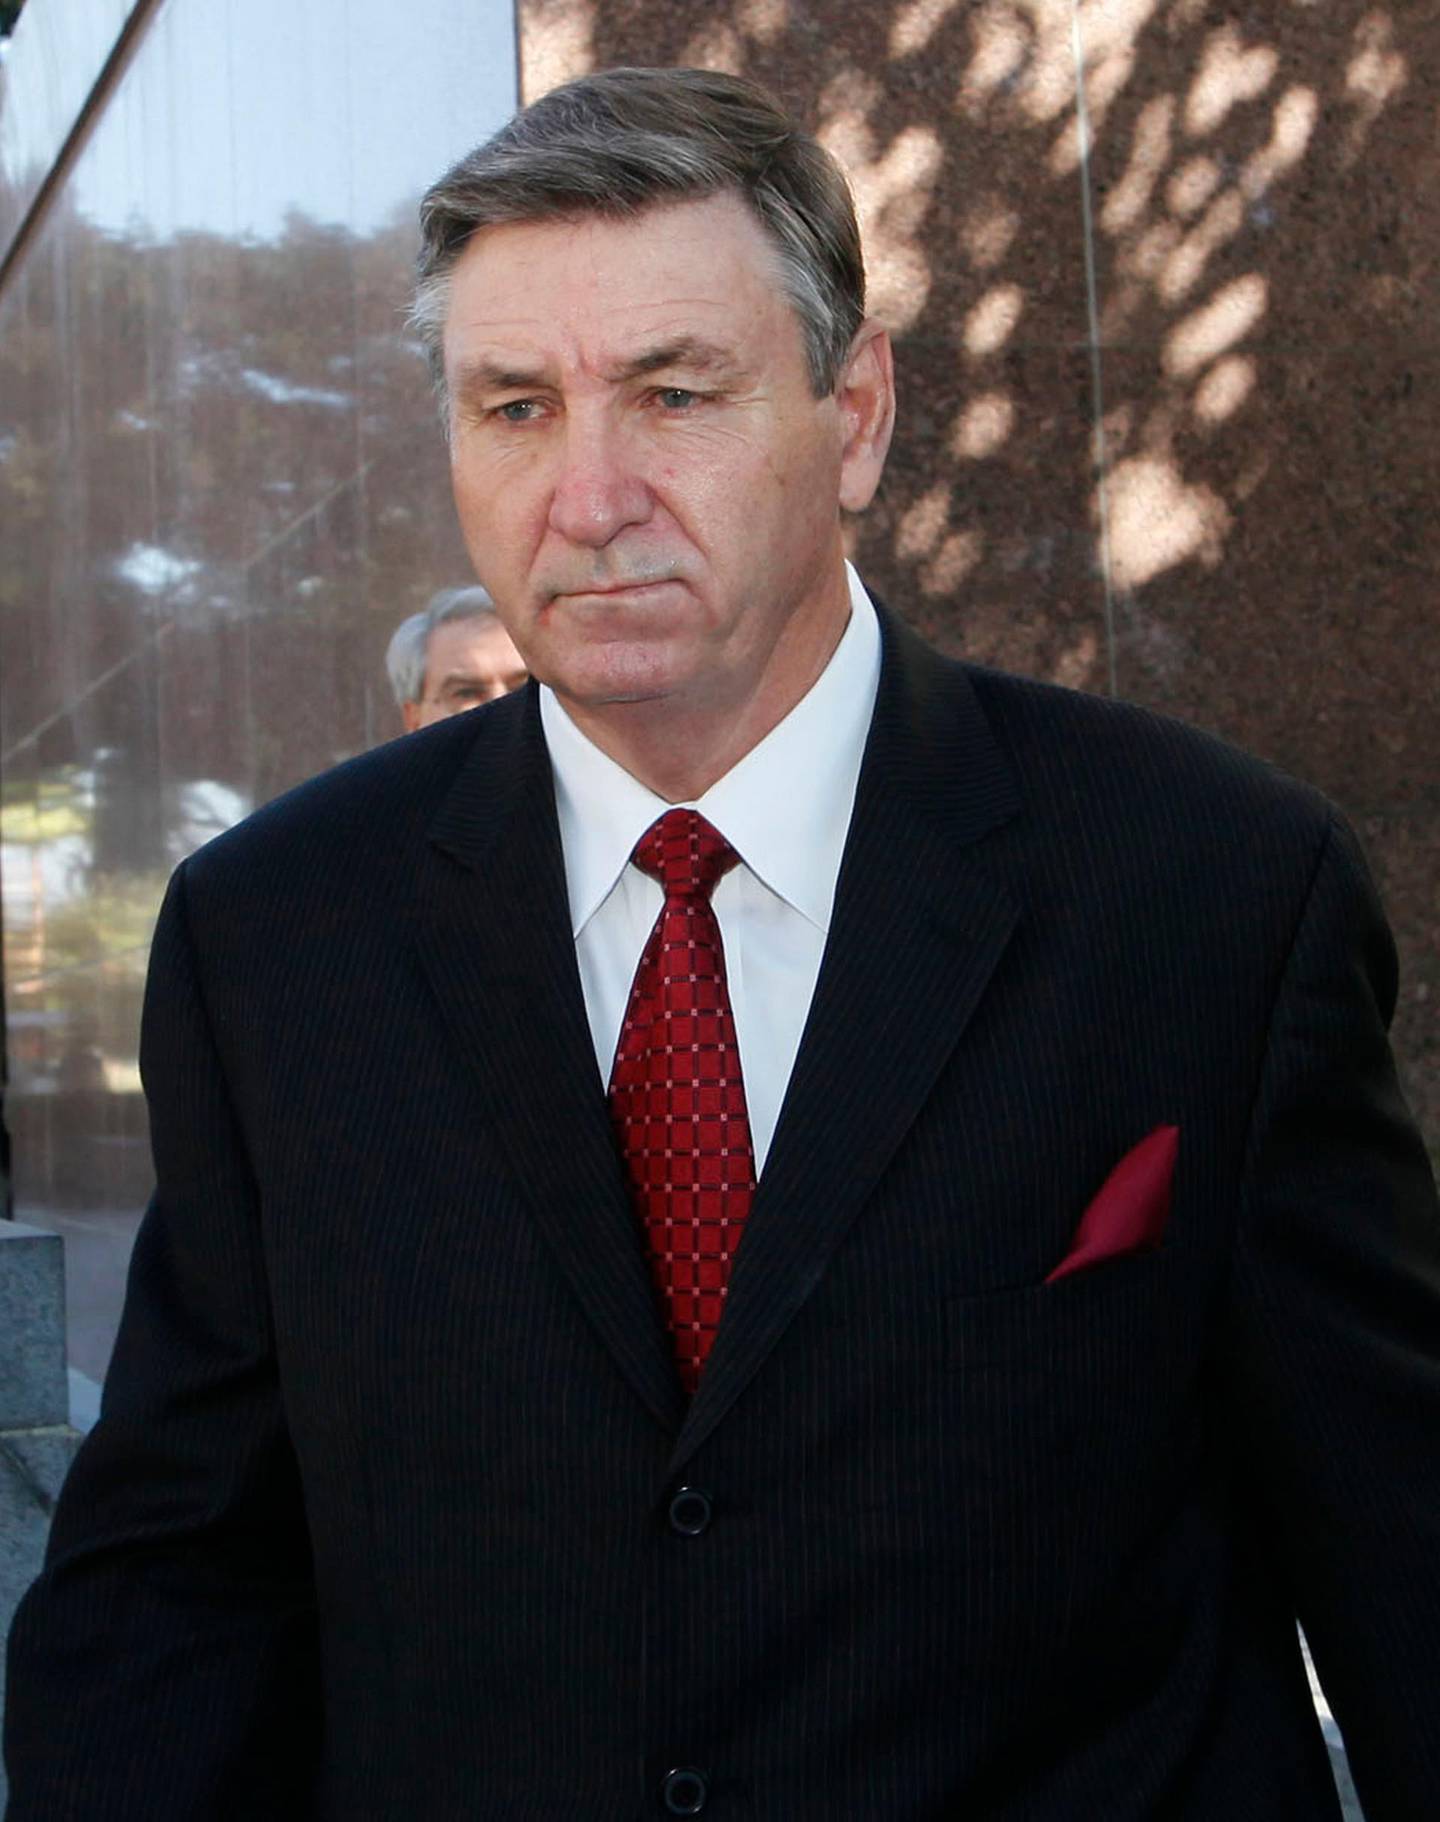 FILE - Jamie Spears, father of singer Britney Spears, leaves the Stanley Mosk Courthouse on Oct. 24, 2012, in Los Angeles. When Britney Spears speaks to a judge at her own request on Wednesday, June. 23, 2021, she'll do it 13 years into a court-enforced conservatorship that has exercised vast control of her life and money by her father. Spears has said the conservatorship saved her from collapse and exploitation. But she has sought more control over how it operates, and says she wants her father out. (AP Photo/Nick Ut, File)